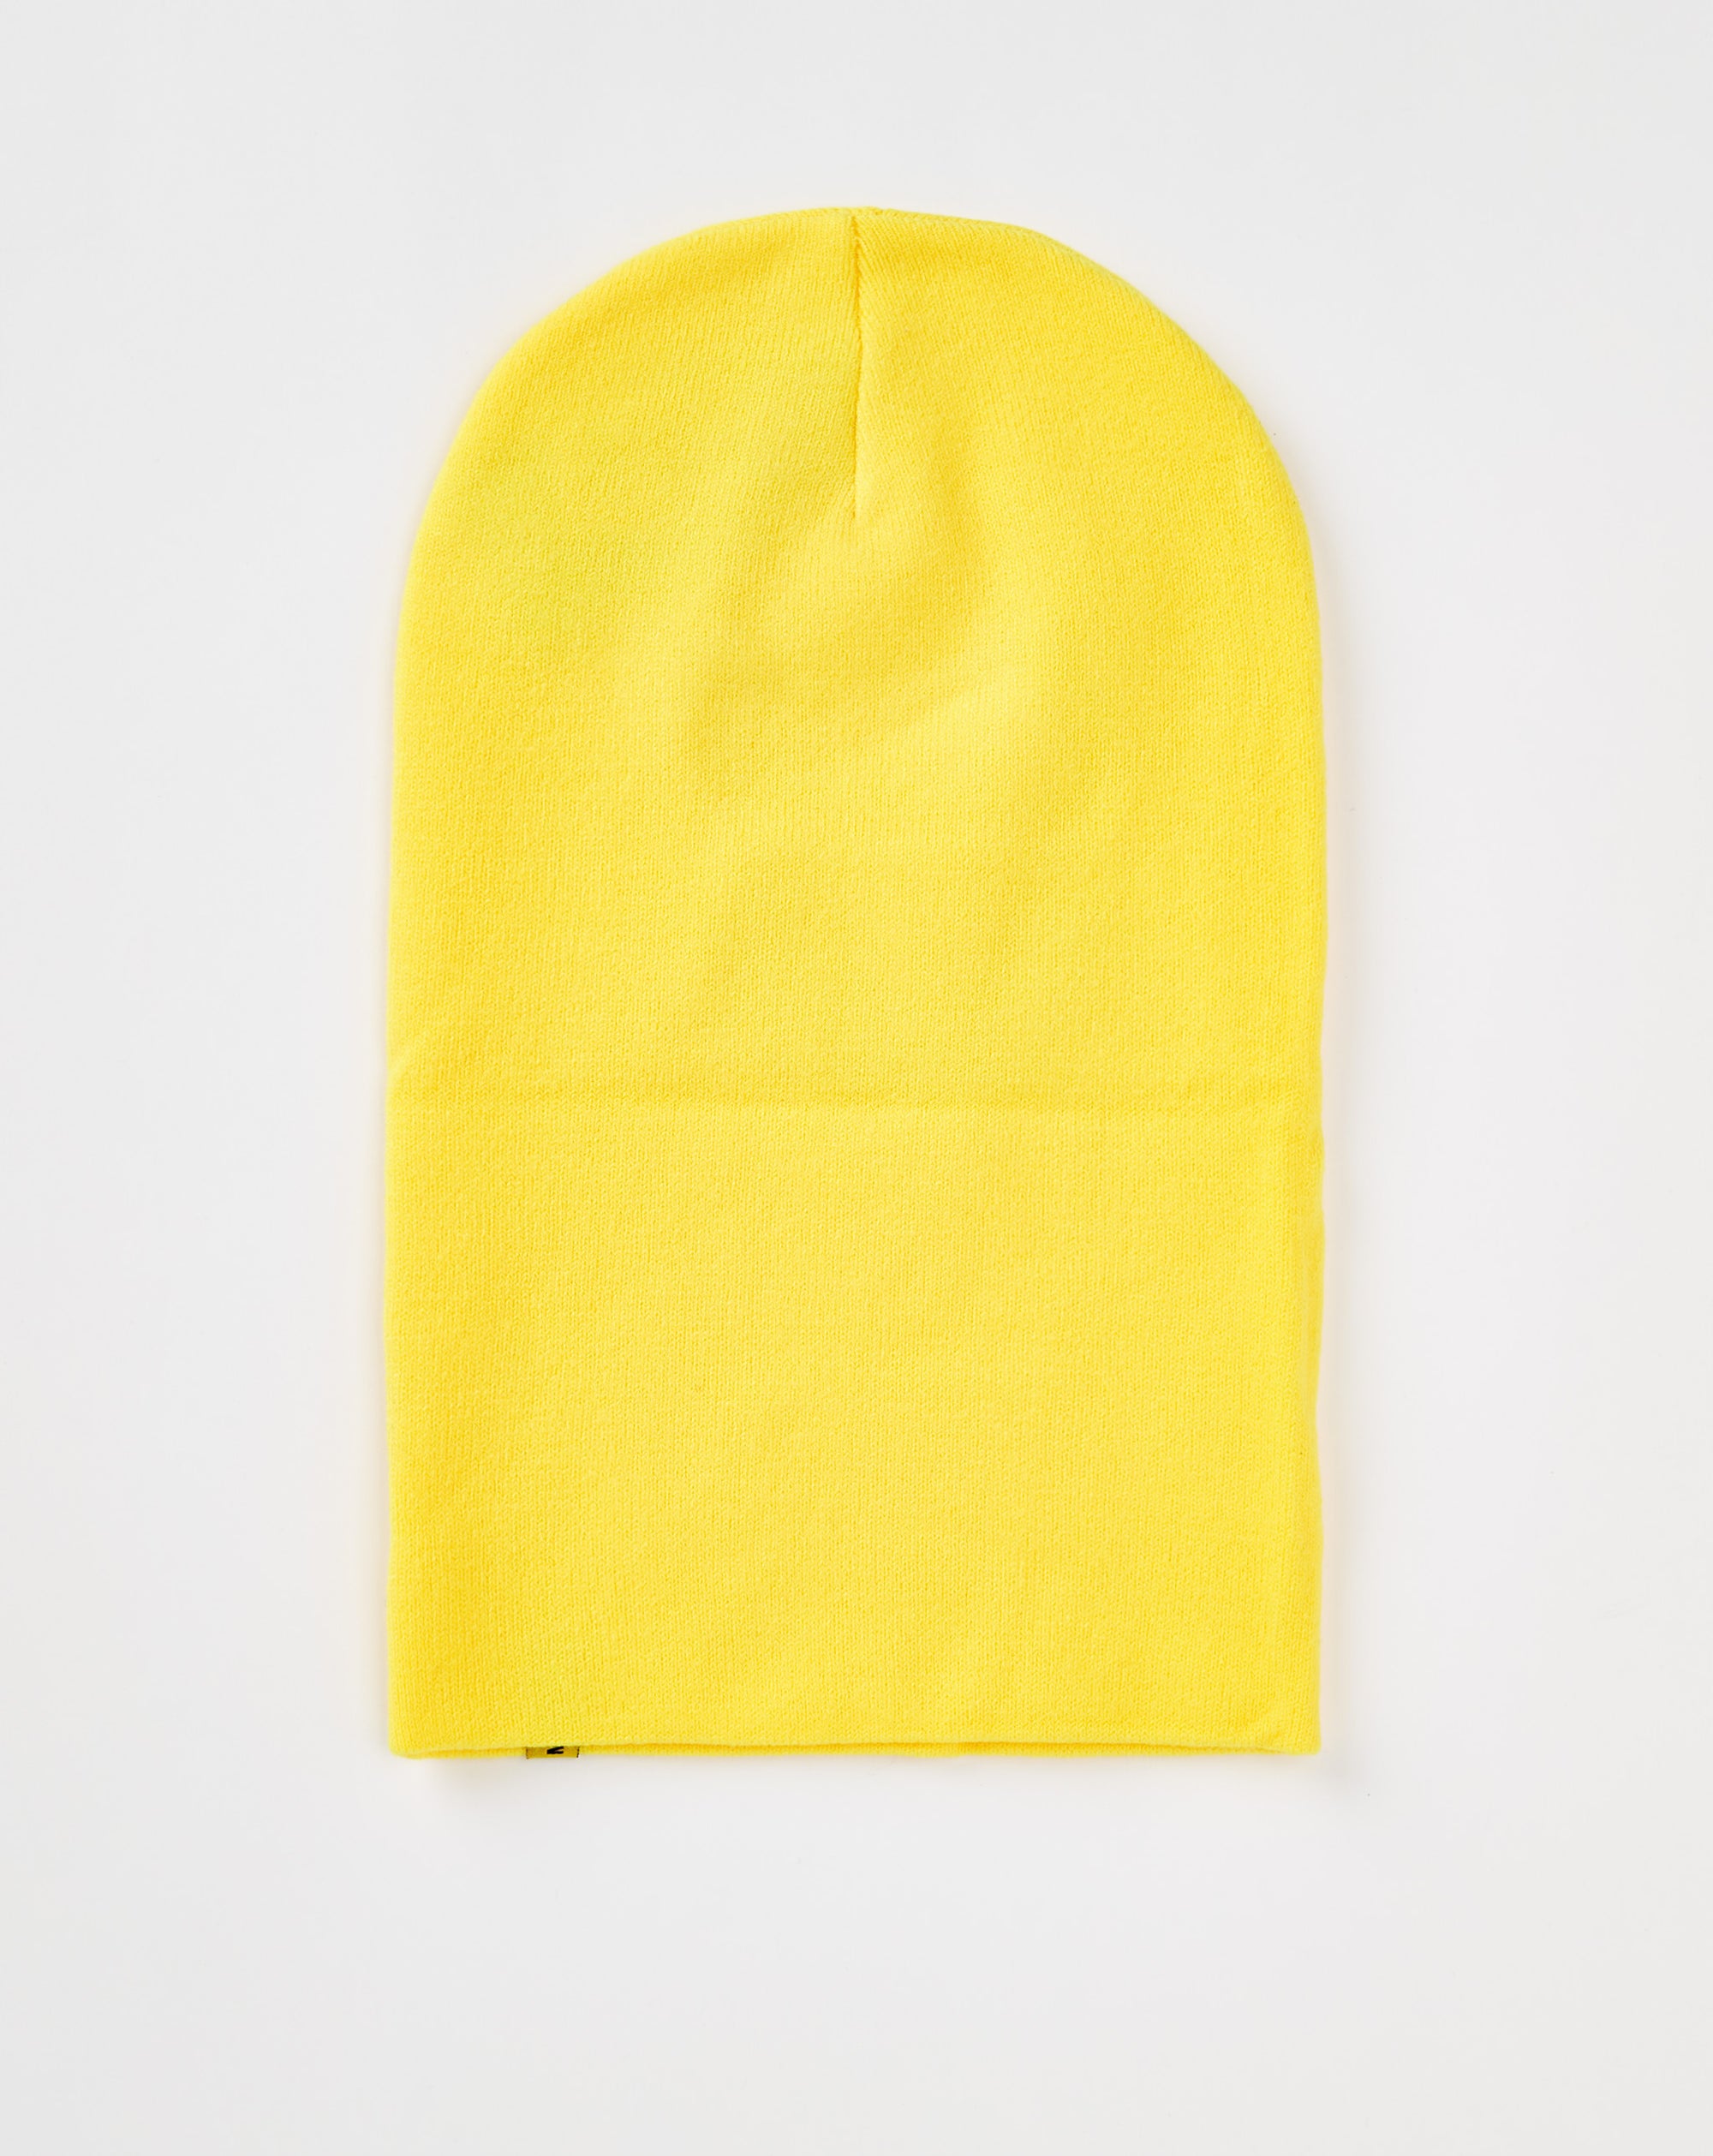 Market Smiley Balaclava - Rule of Next Accessories